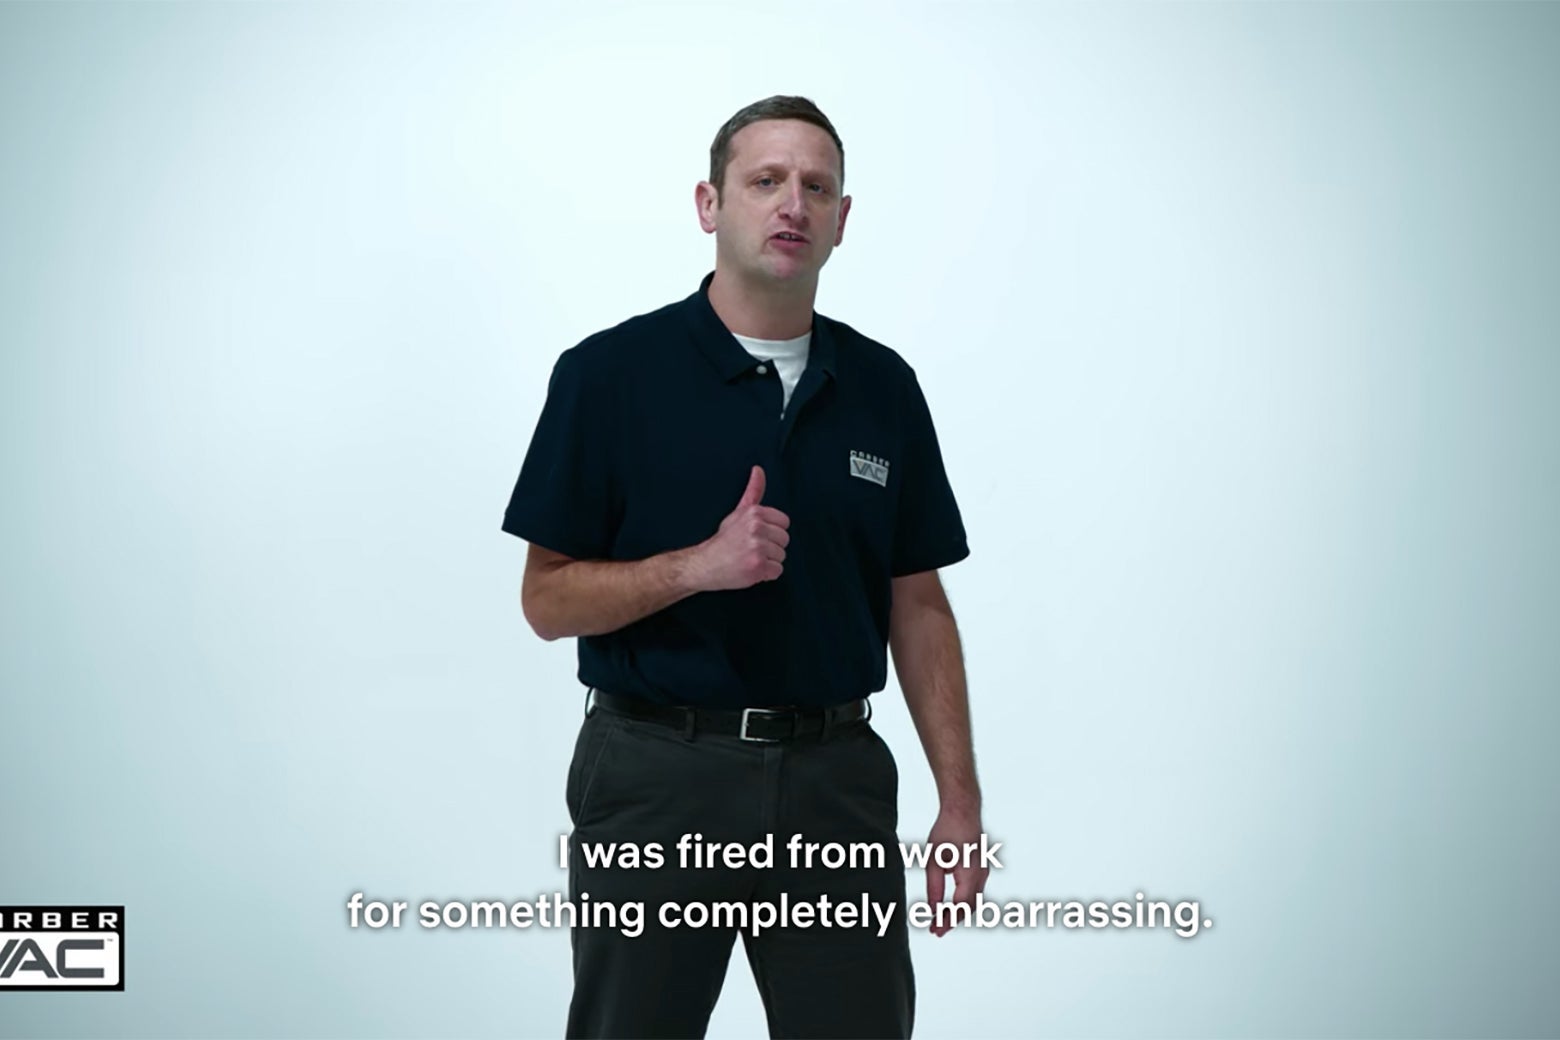 A man against a white background, captioned "I was fired from work for something complete embarrassing."